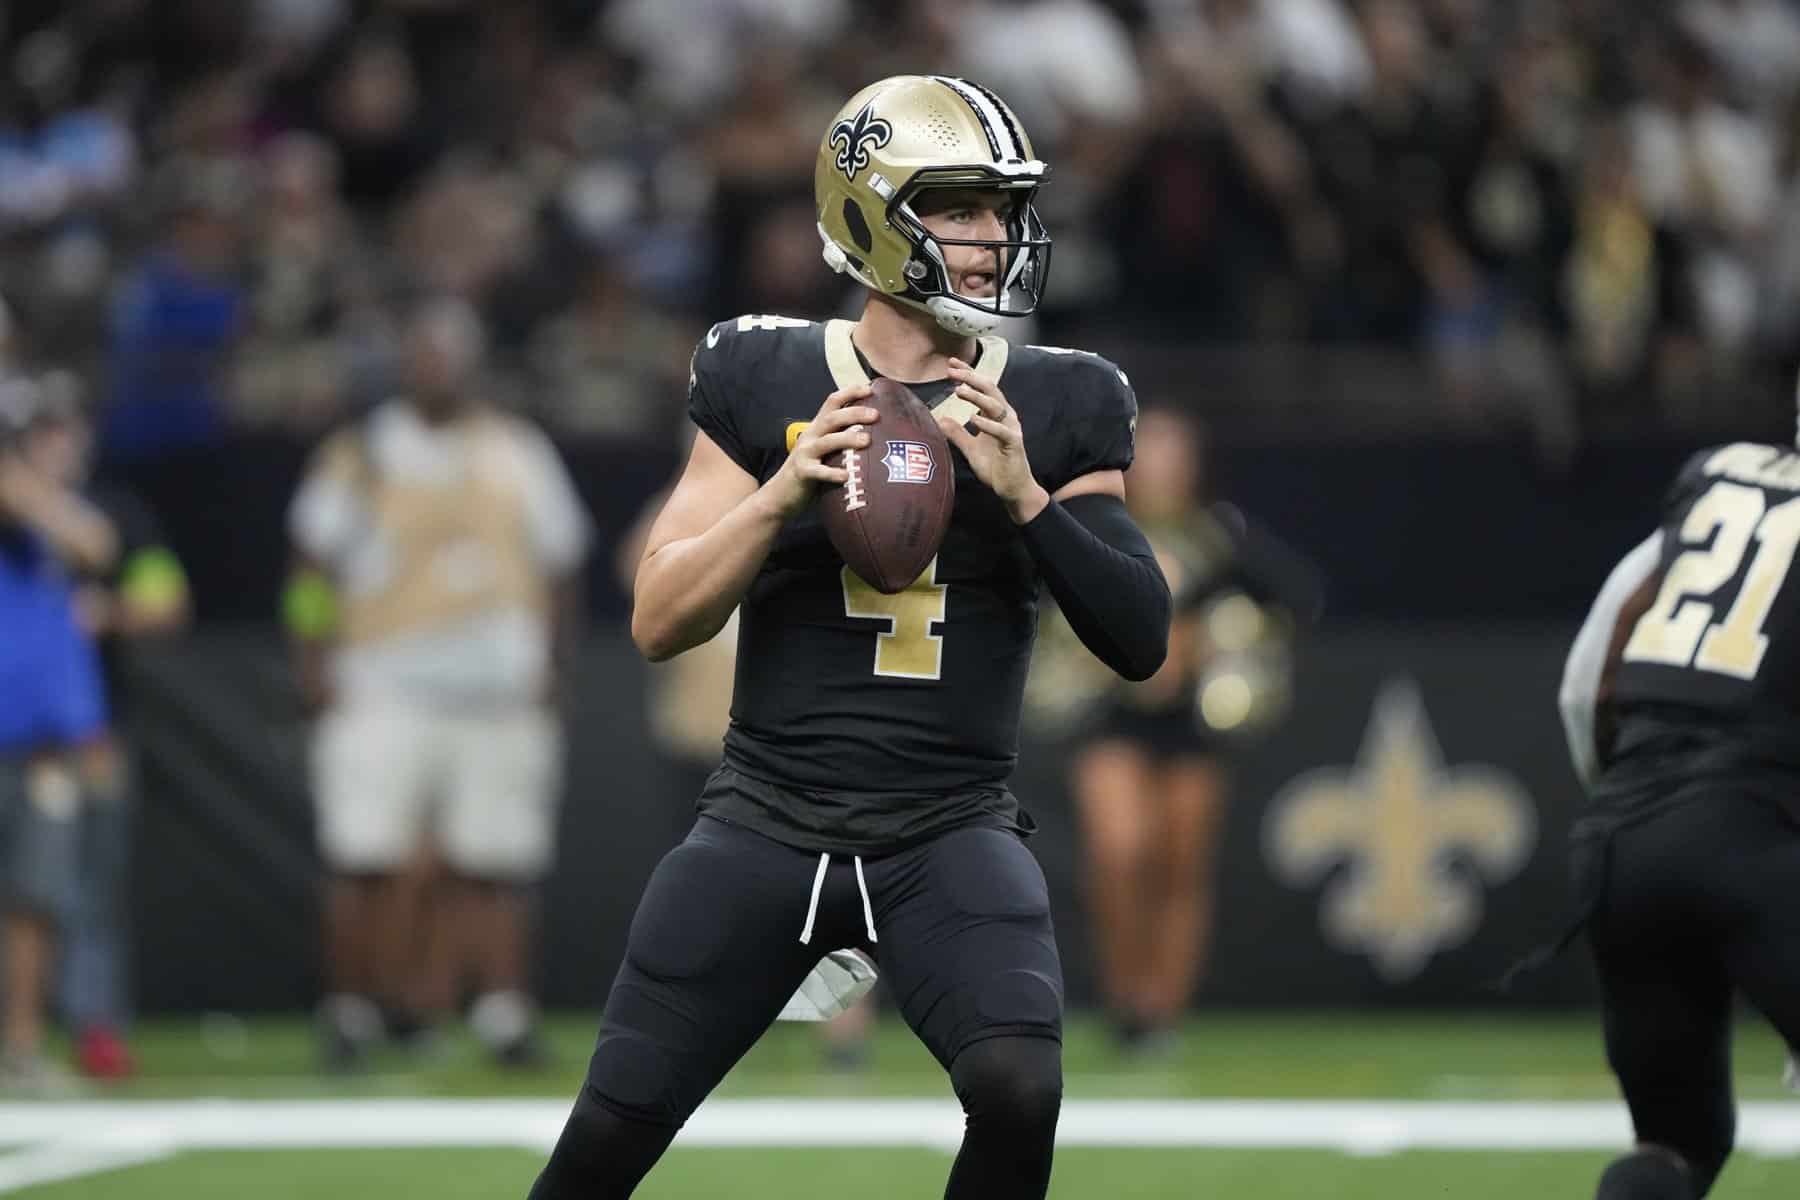 OwnersBox NFL DFS for Monday Night Football brings some exciting options that make for solid NFL DFS picks in the two game slate featuring...